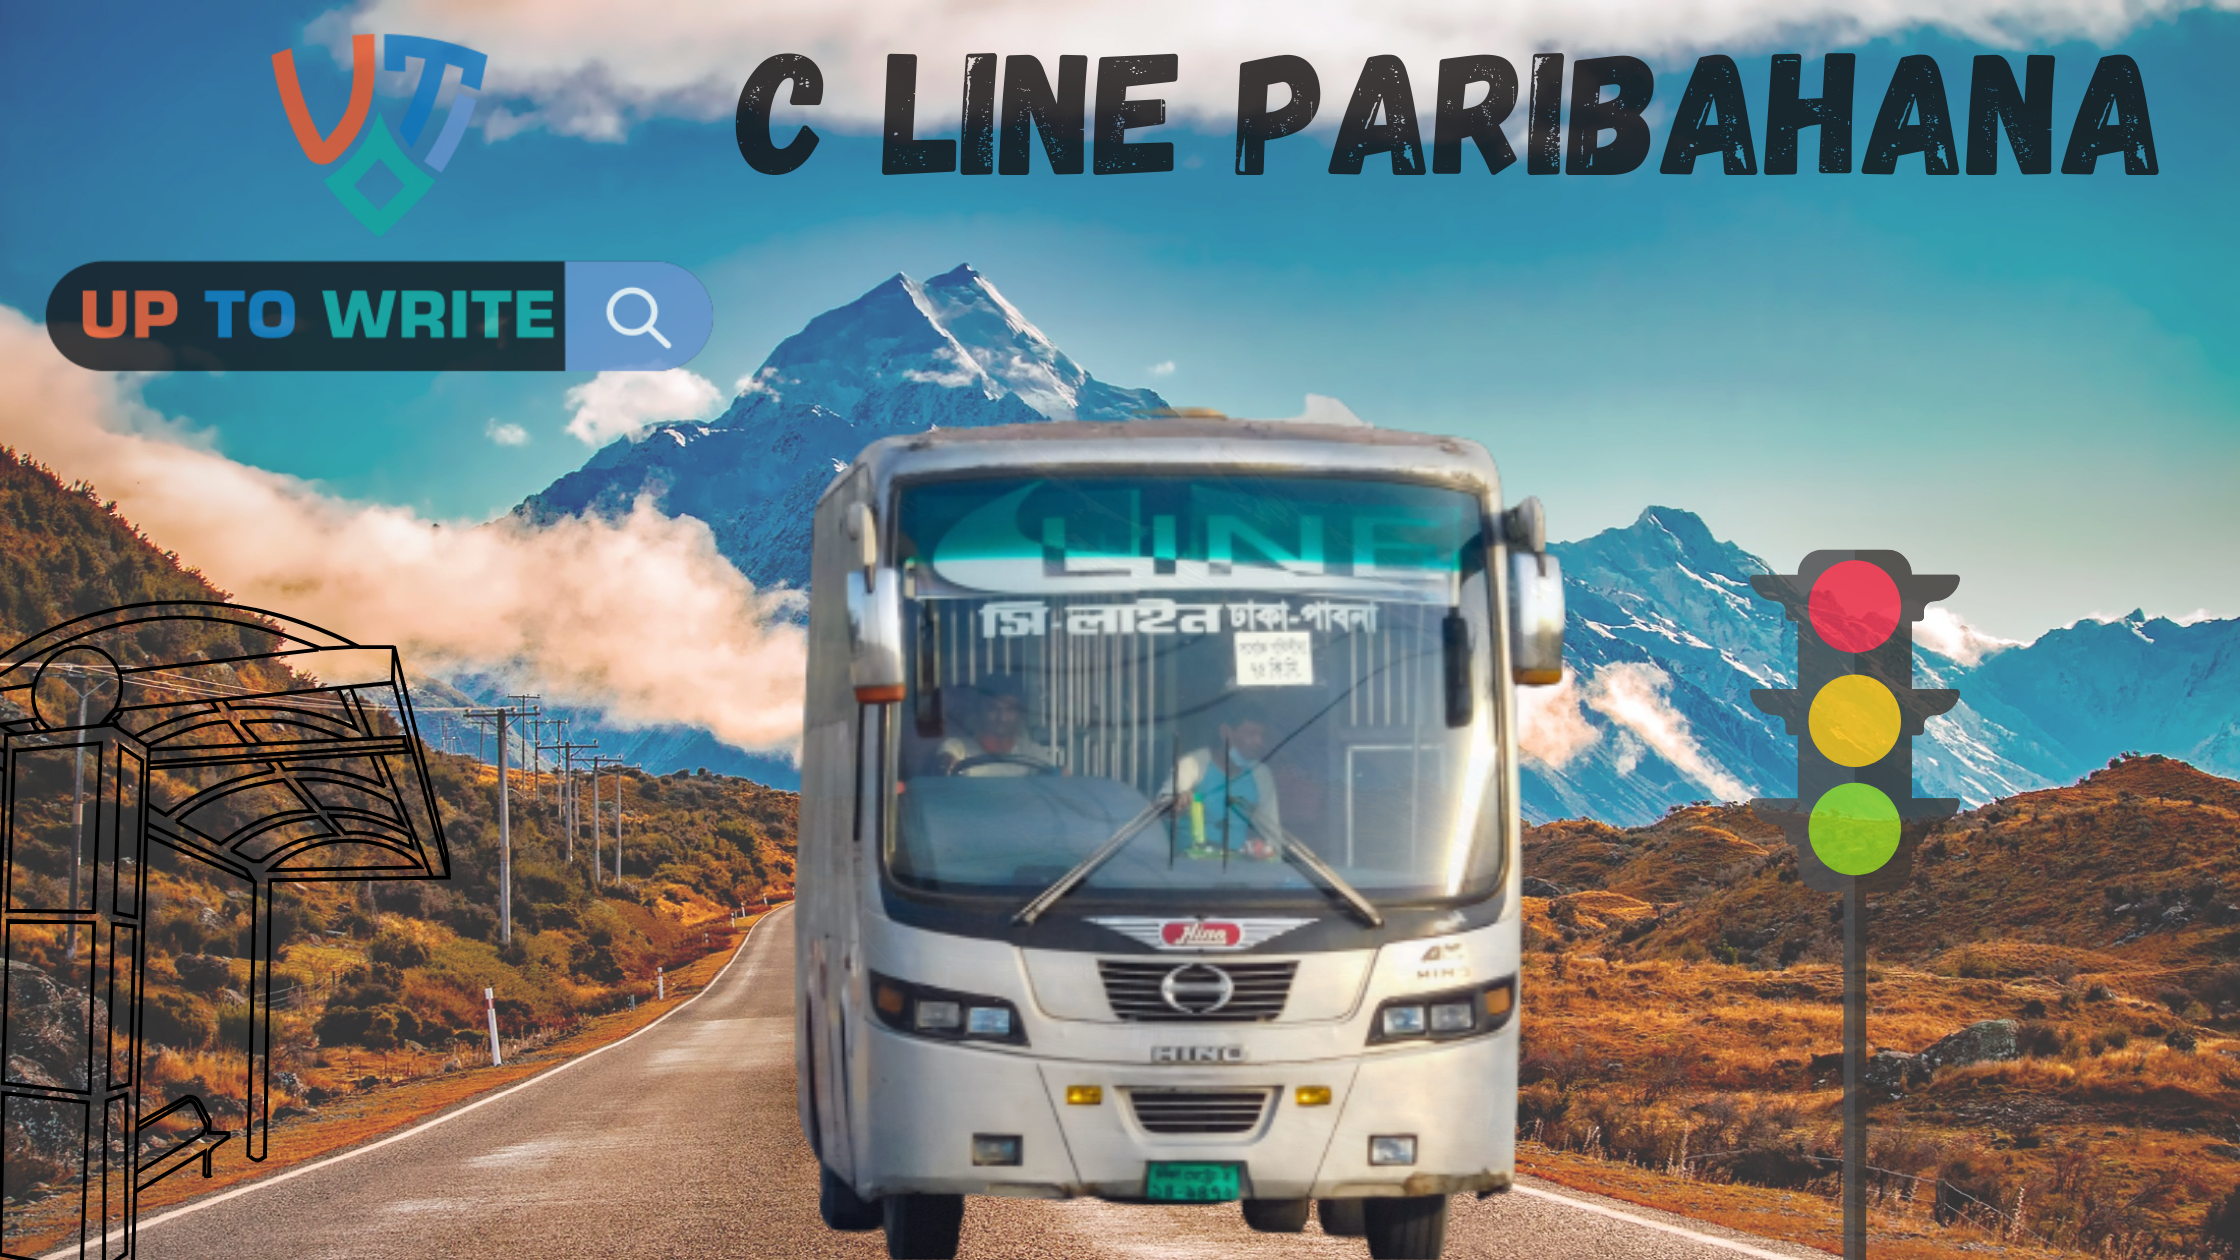 C Line Paribahana All counter mobile number, address and online ticket